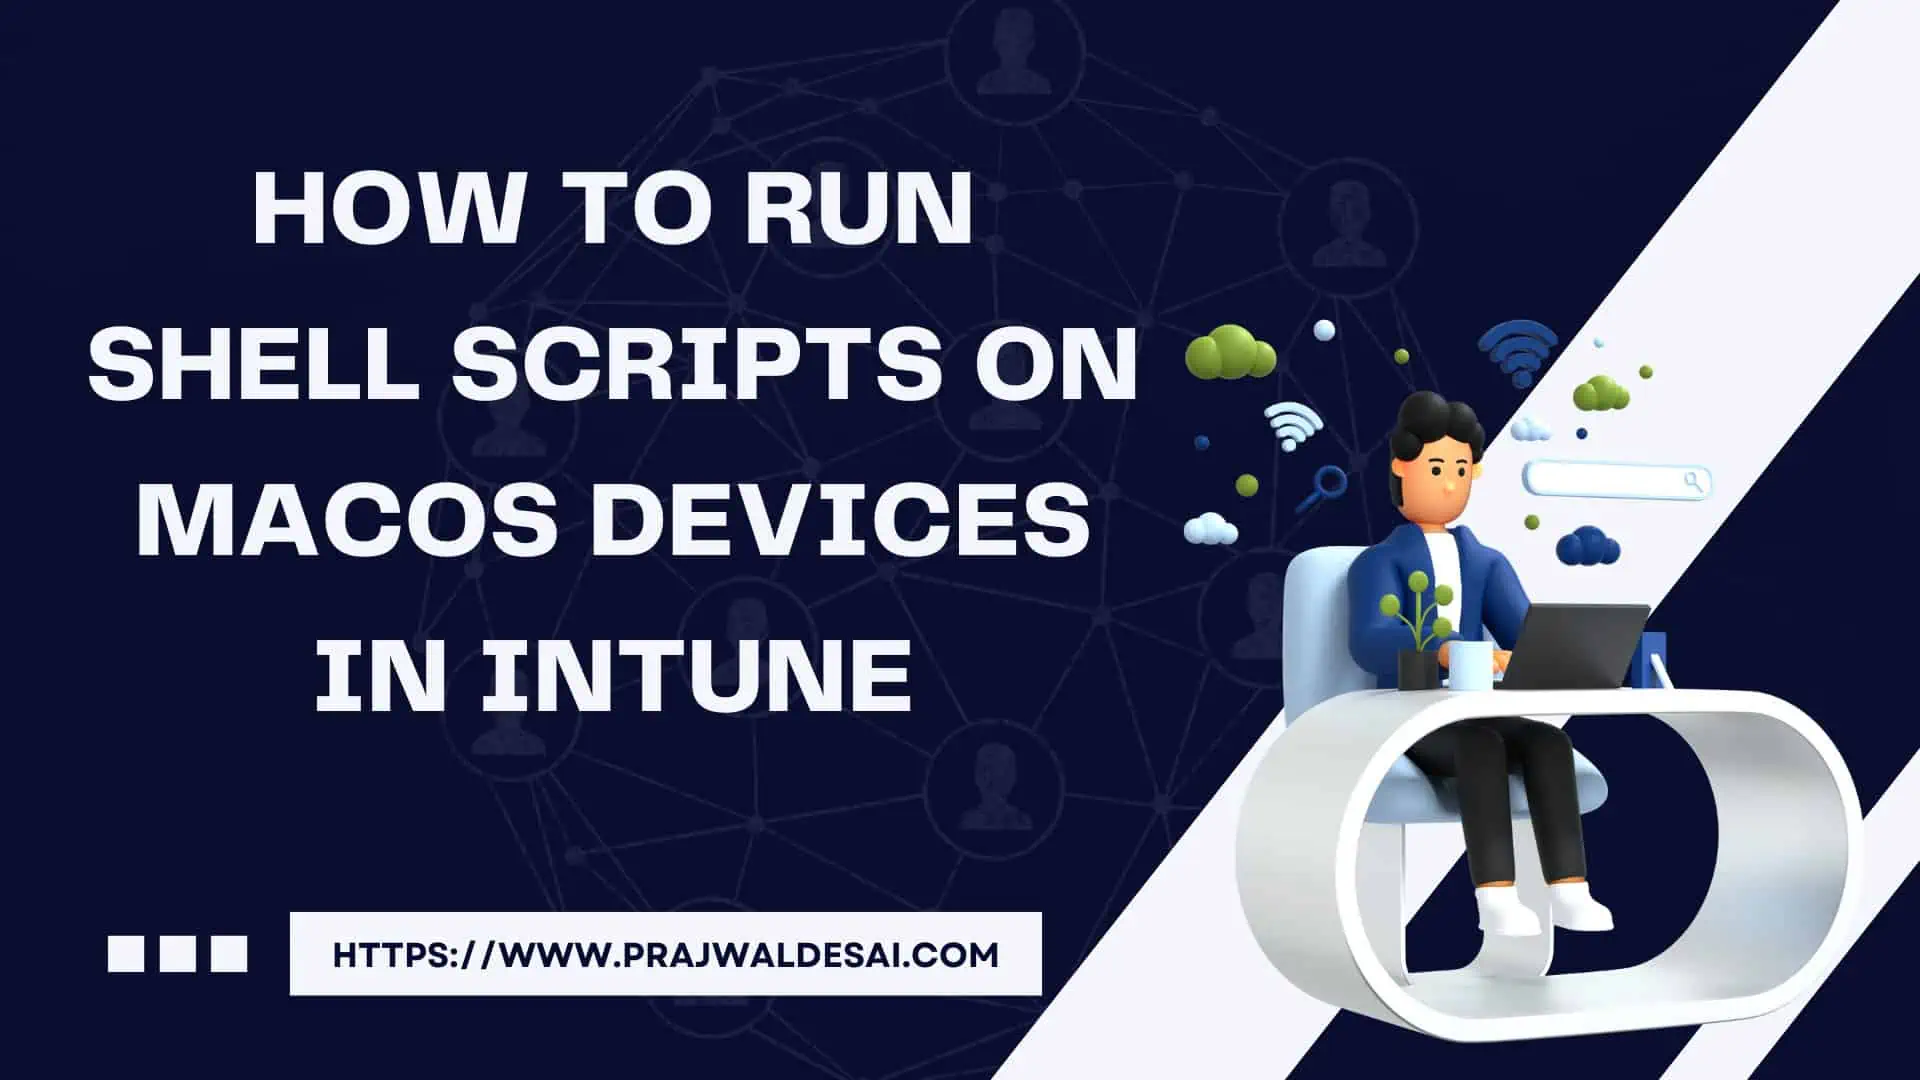 How to Run Shell Scripts on macOS devices in Intune